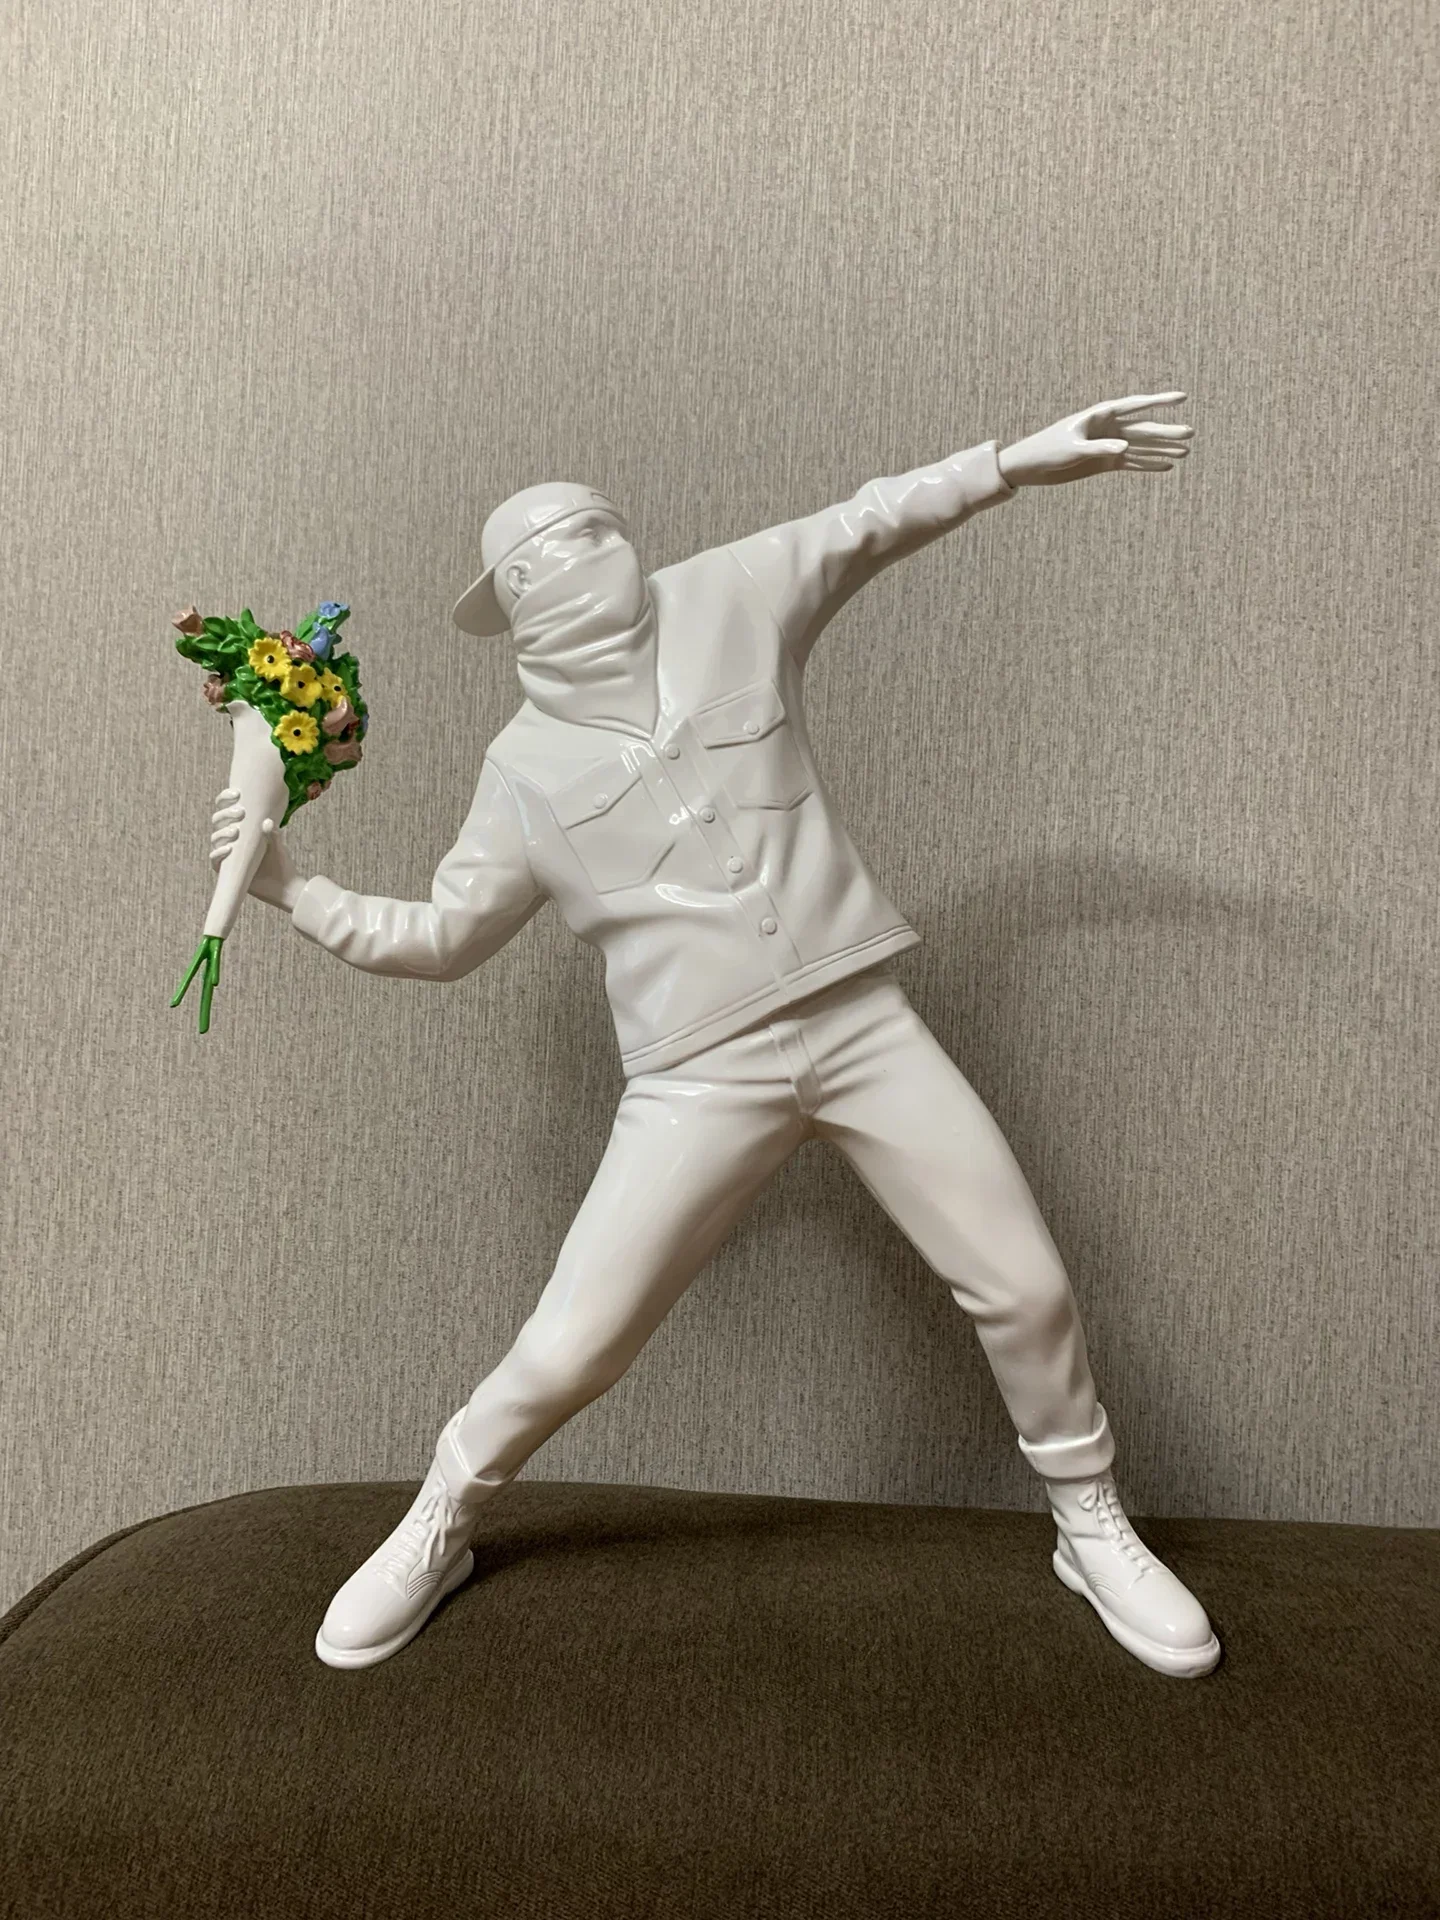 

Crafts Flower Bomber Full-Length Portrait Street Art Throwing Flowers People Statue Decoration Action Figure Collection model